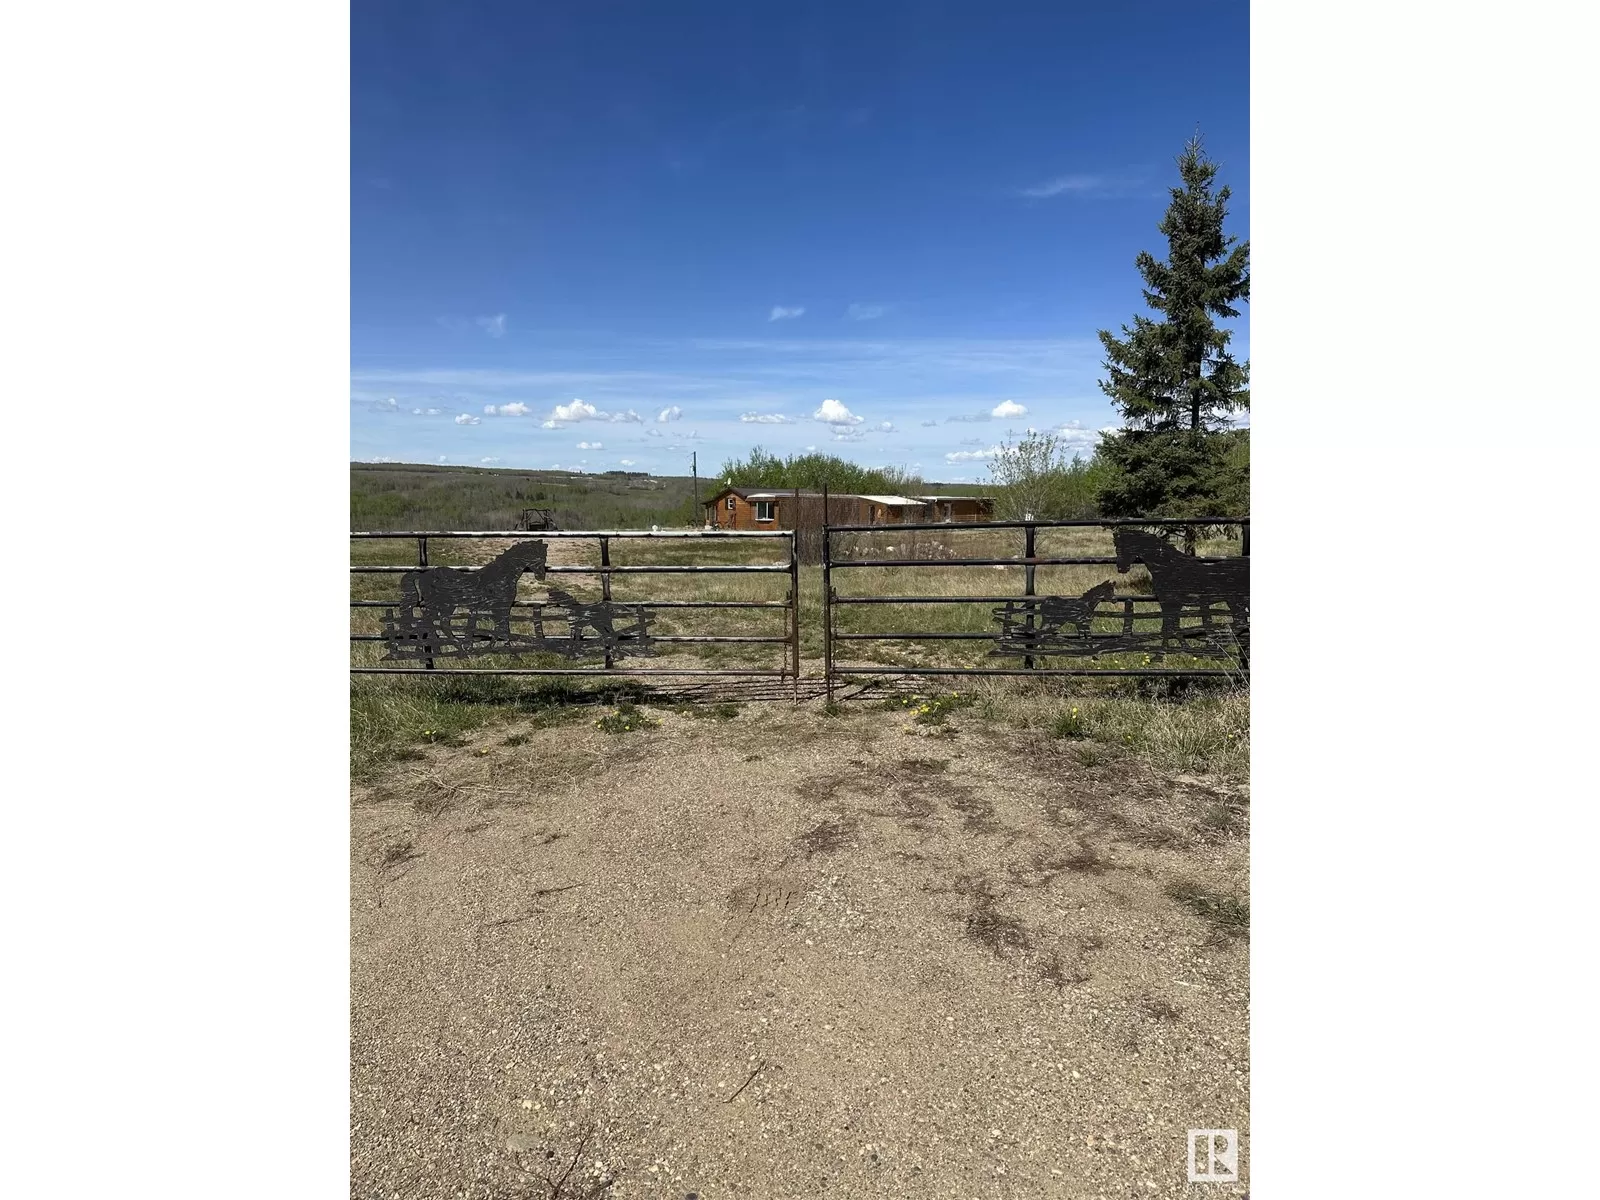 No Building for rent: 55323 Rr43, Rural St. Paul County, Alberta T0A 1X0